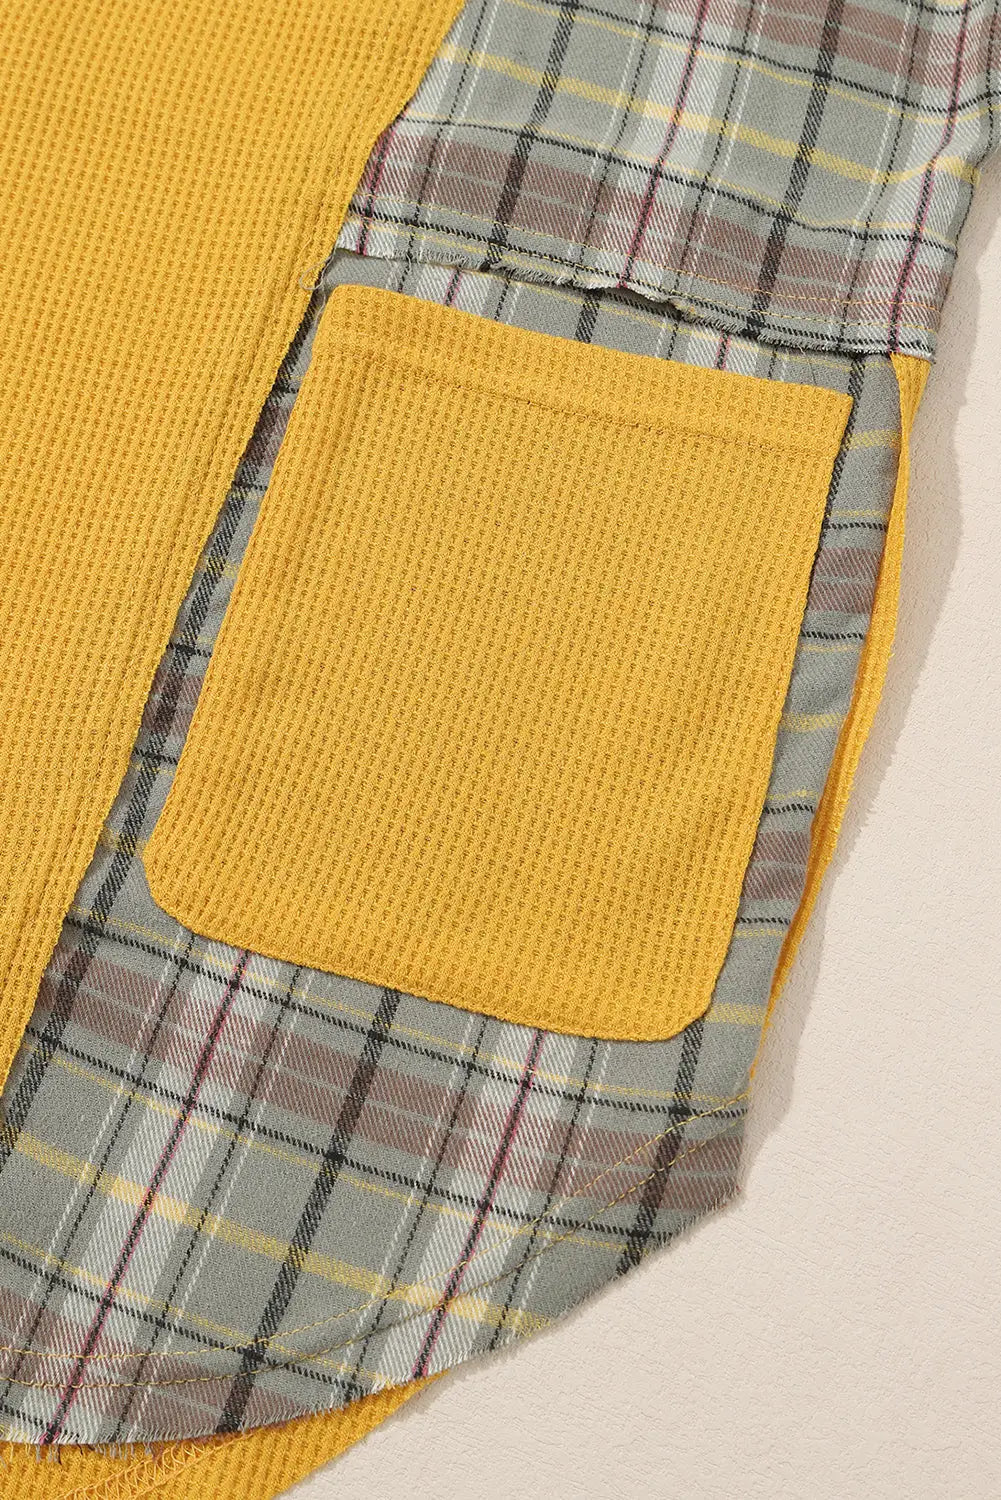 Yellow waffle knit plaid patchwork pocketed henley hoodie - sweatshirts & hoodies